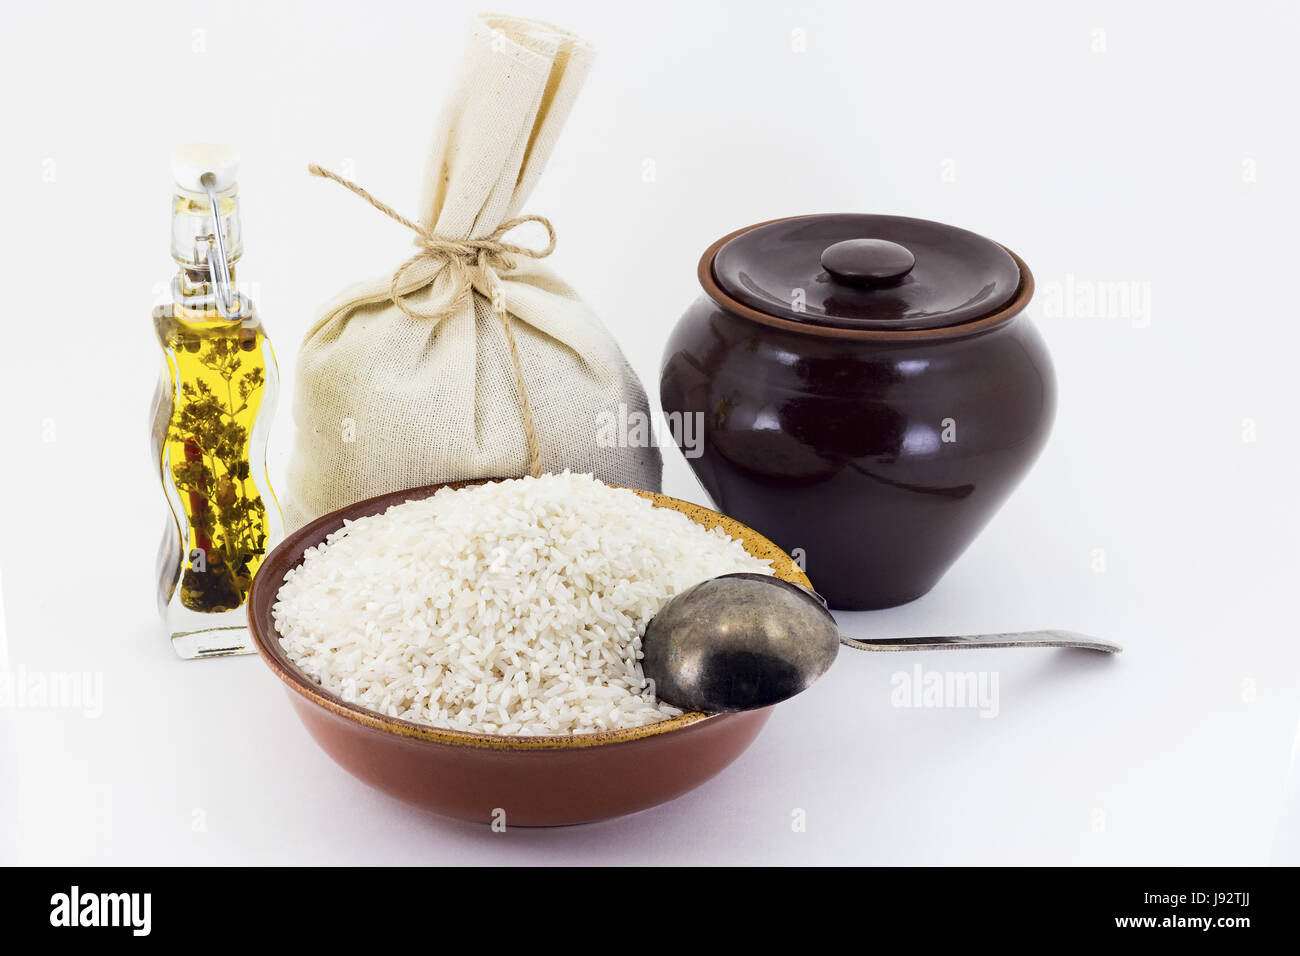 Still life of Rice cereal in ceramic pial, ceramic pot, old spoon and canvas bag for cereals, oil with spices and seasonings, isolated on white backgr Stock Photo